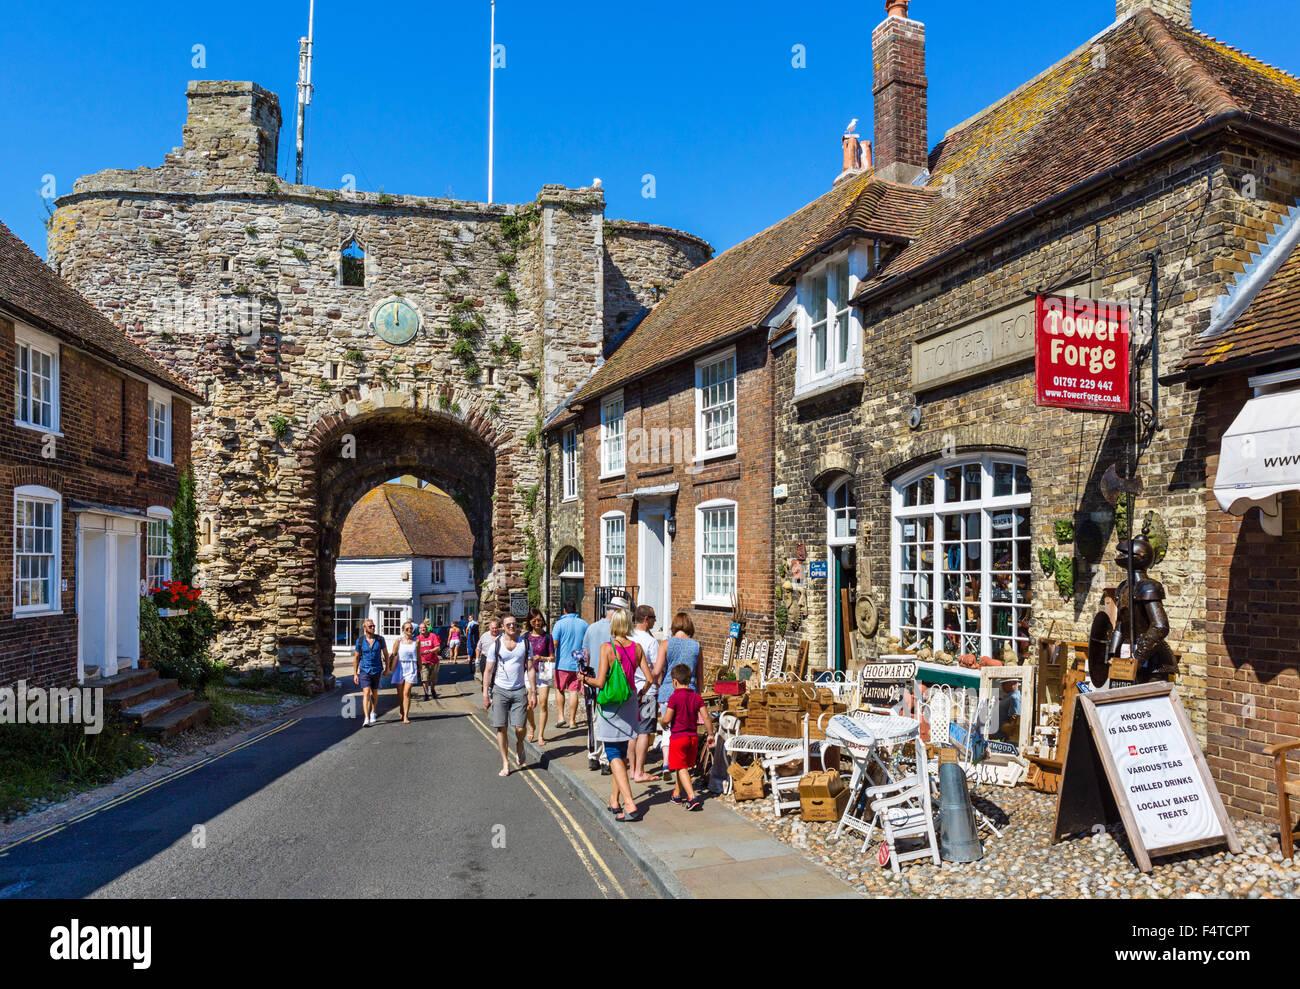 The 14thC Landgate arch, an historic entrance into the old town, Rye, East Sussex, England, UK Stock Photo